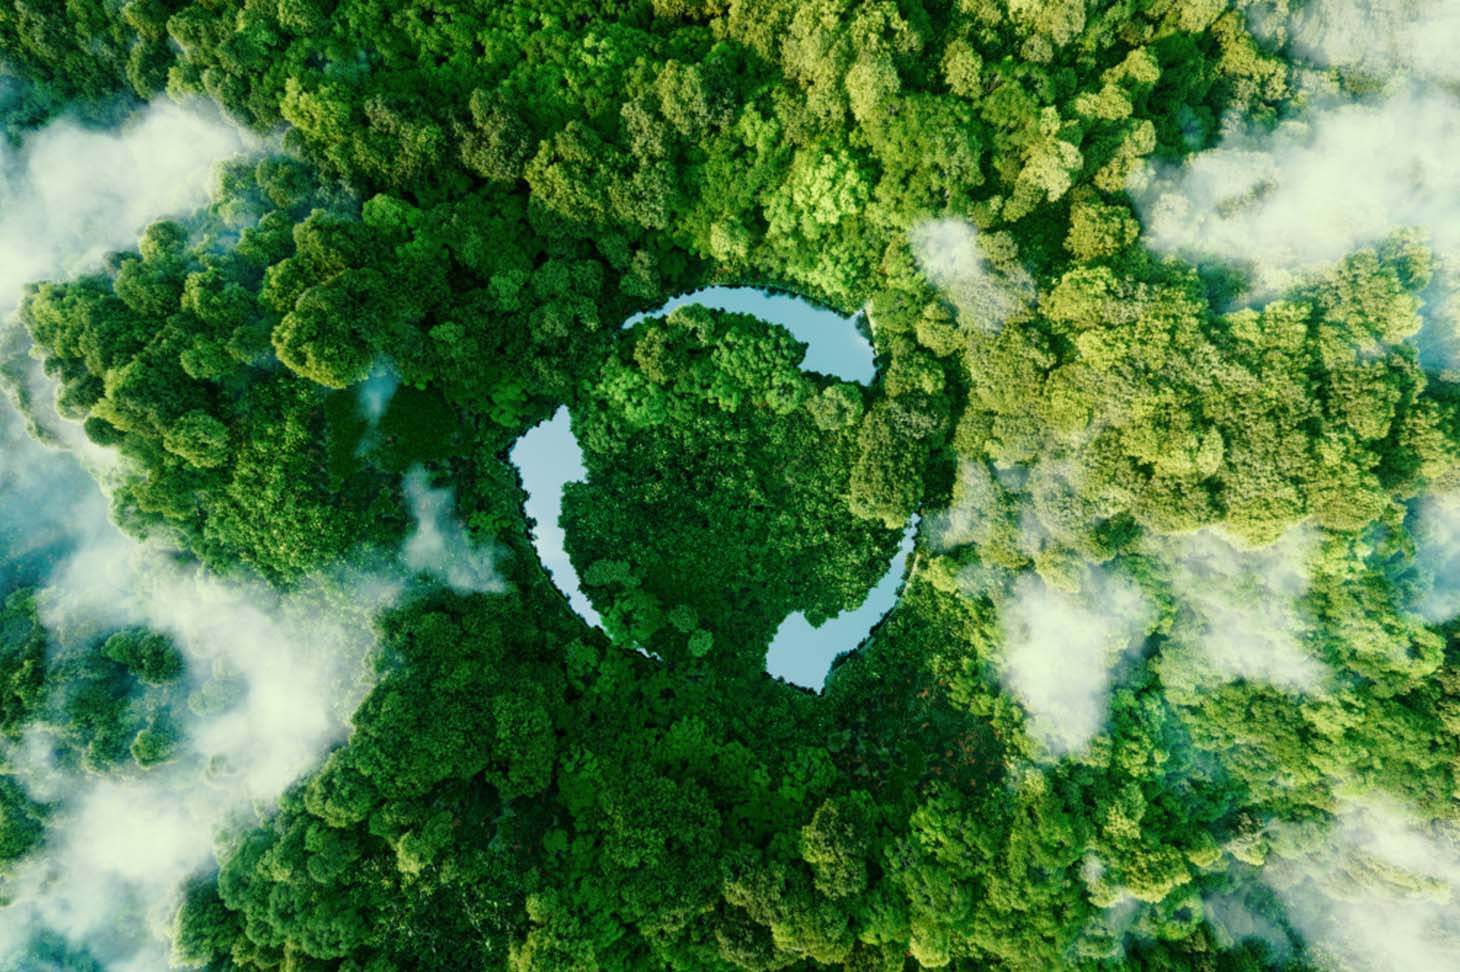 Rainforest aerial view with water in the shape of recycling symbol